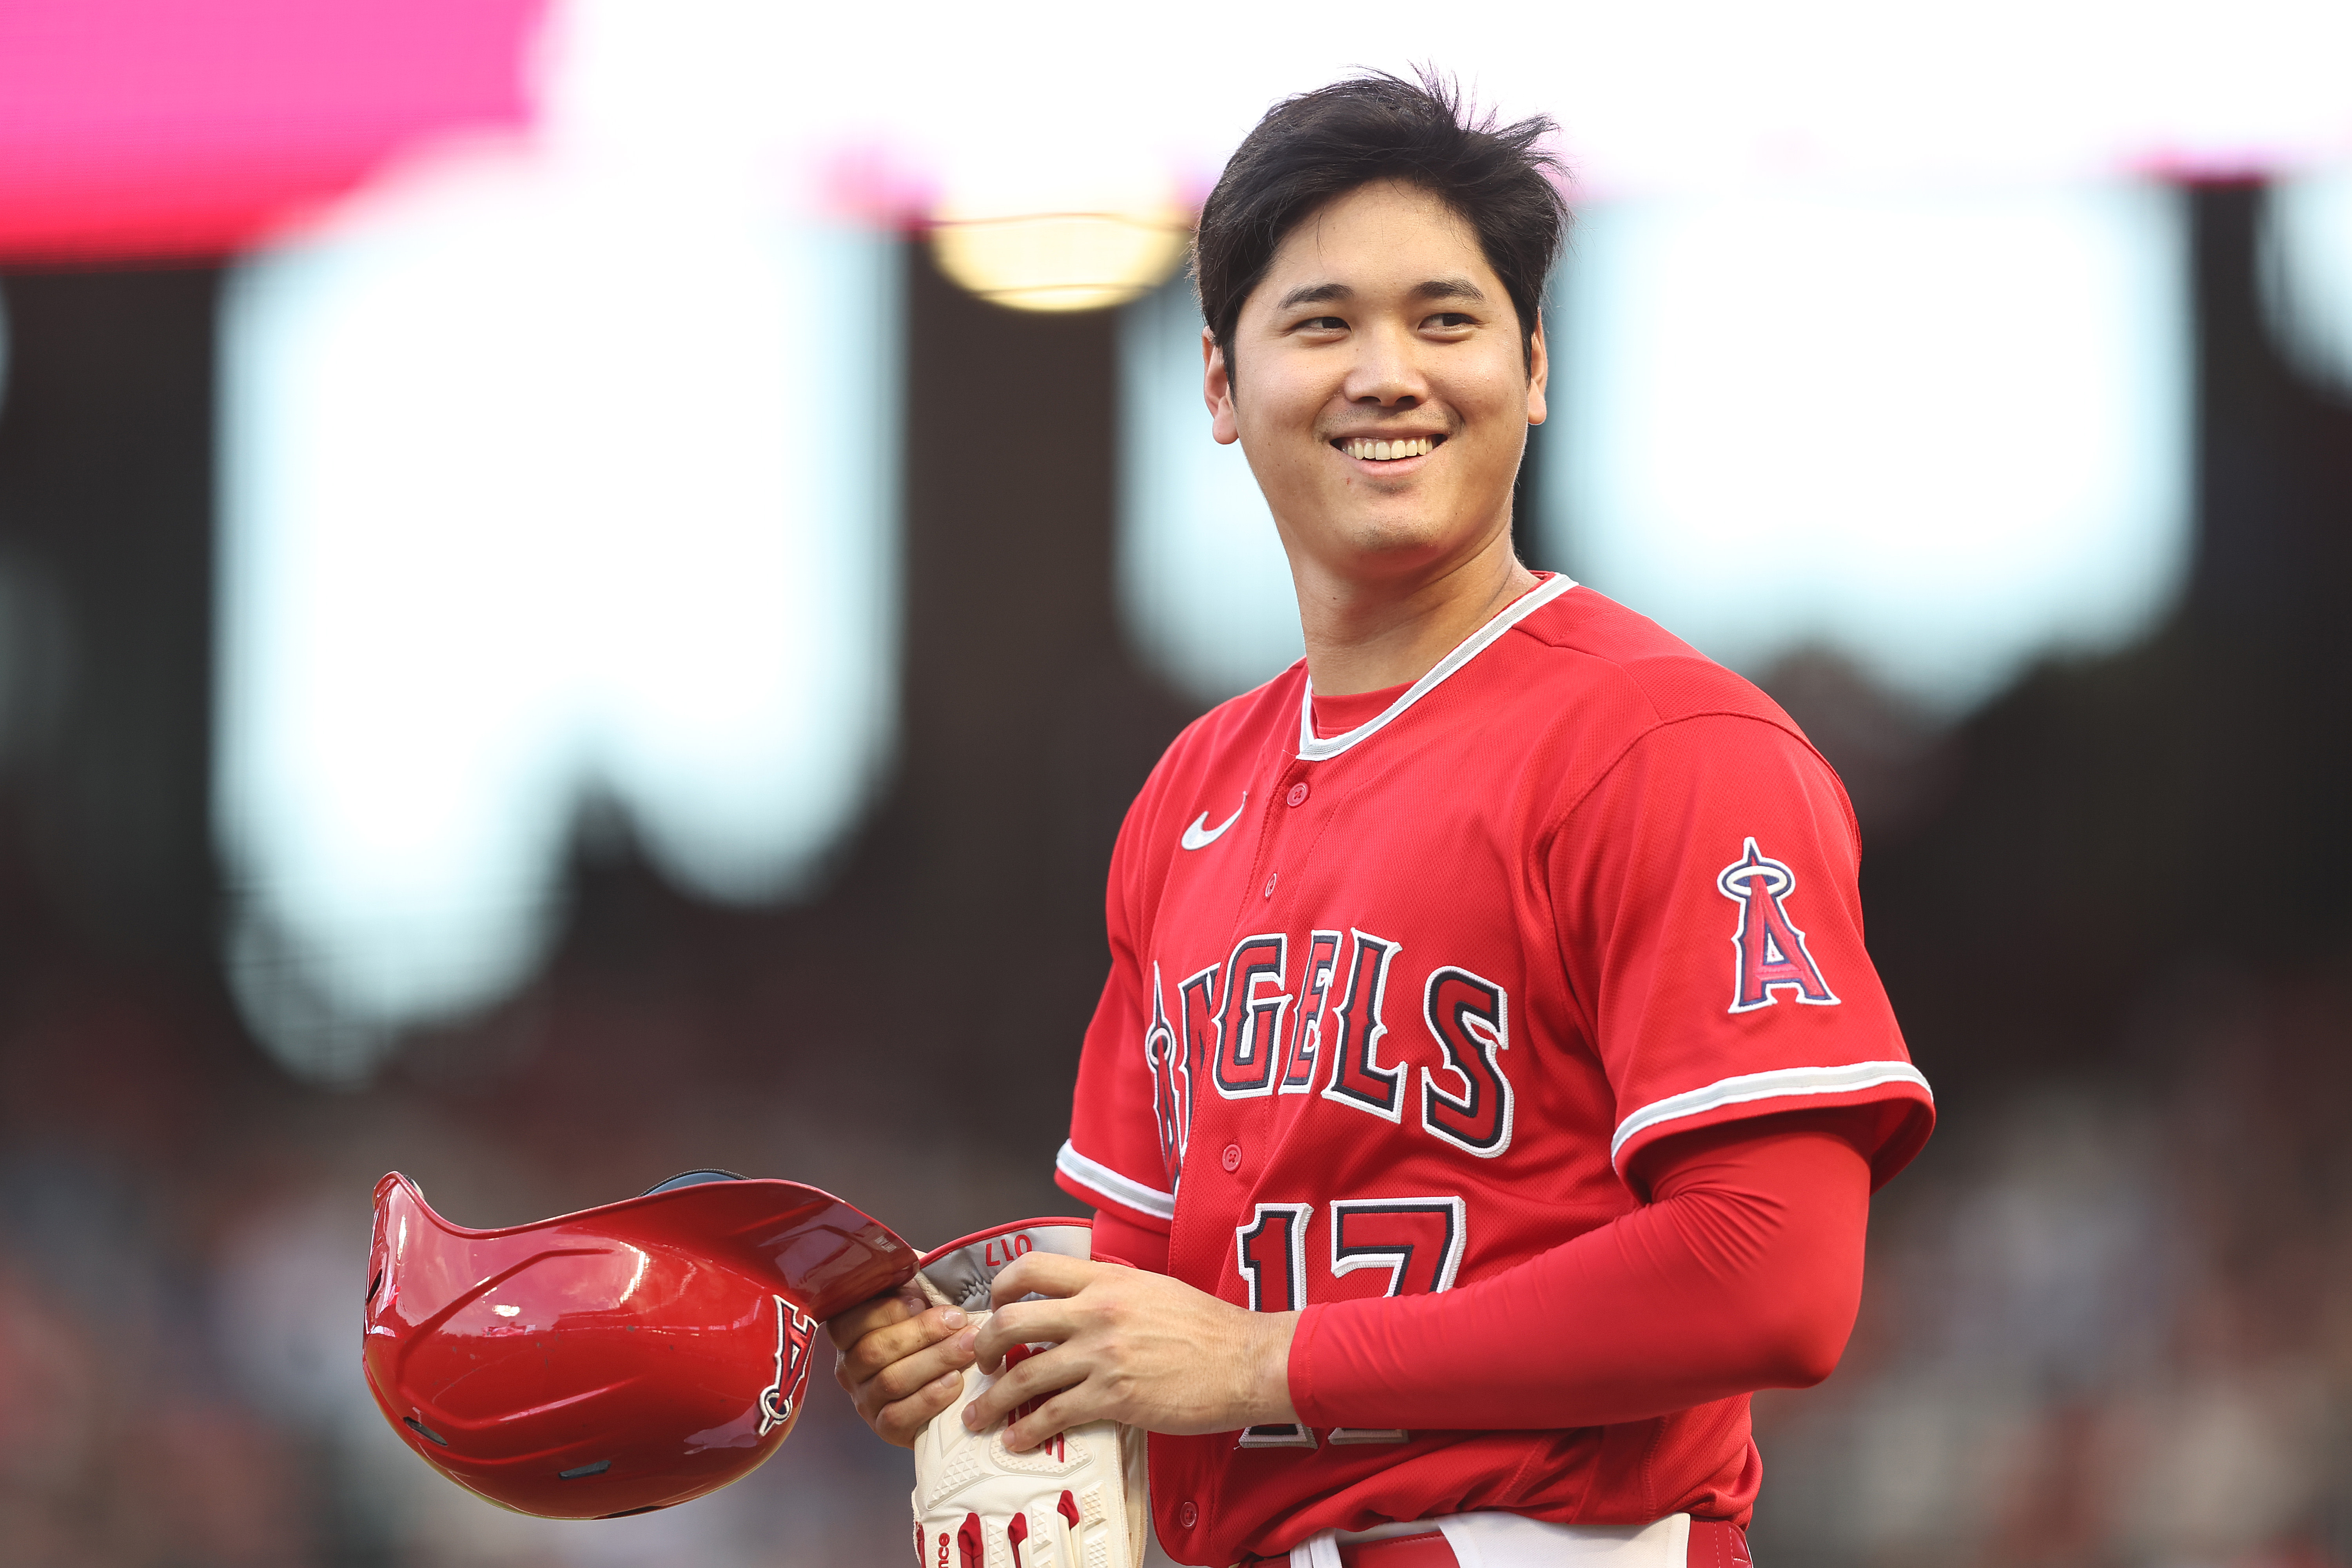 Shohei Ohtani pulled for pinch hitter in 9th due to cramps - ESPN